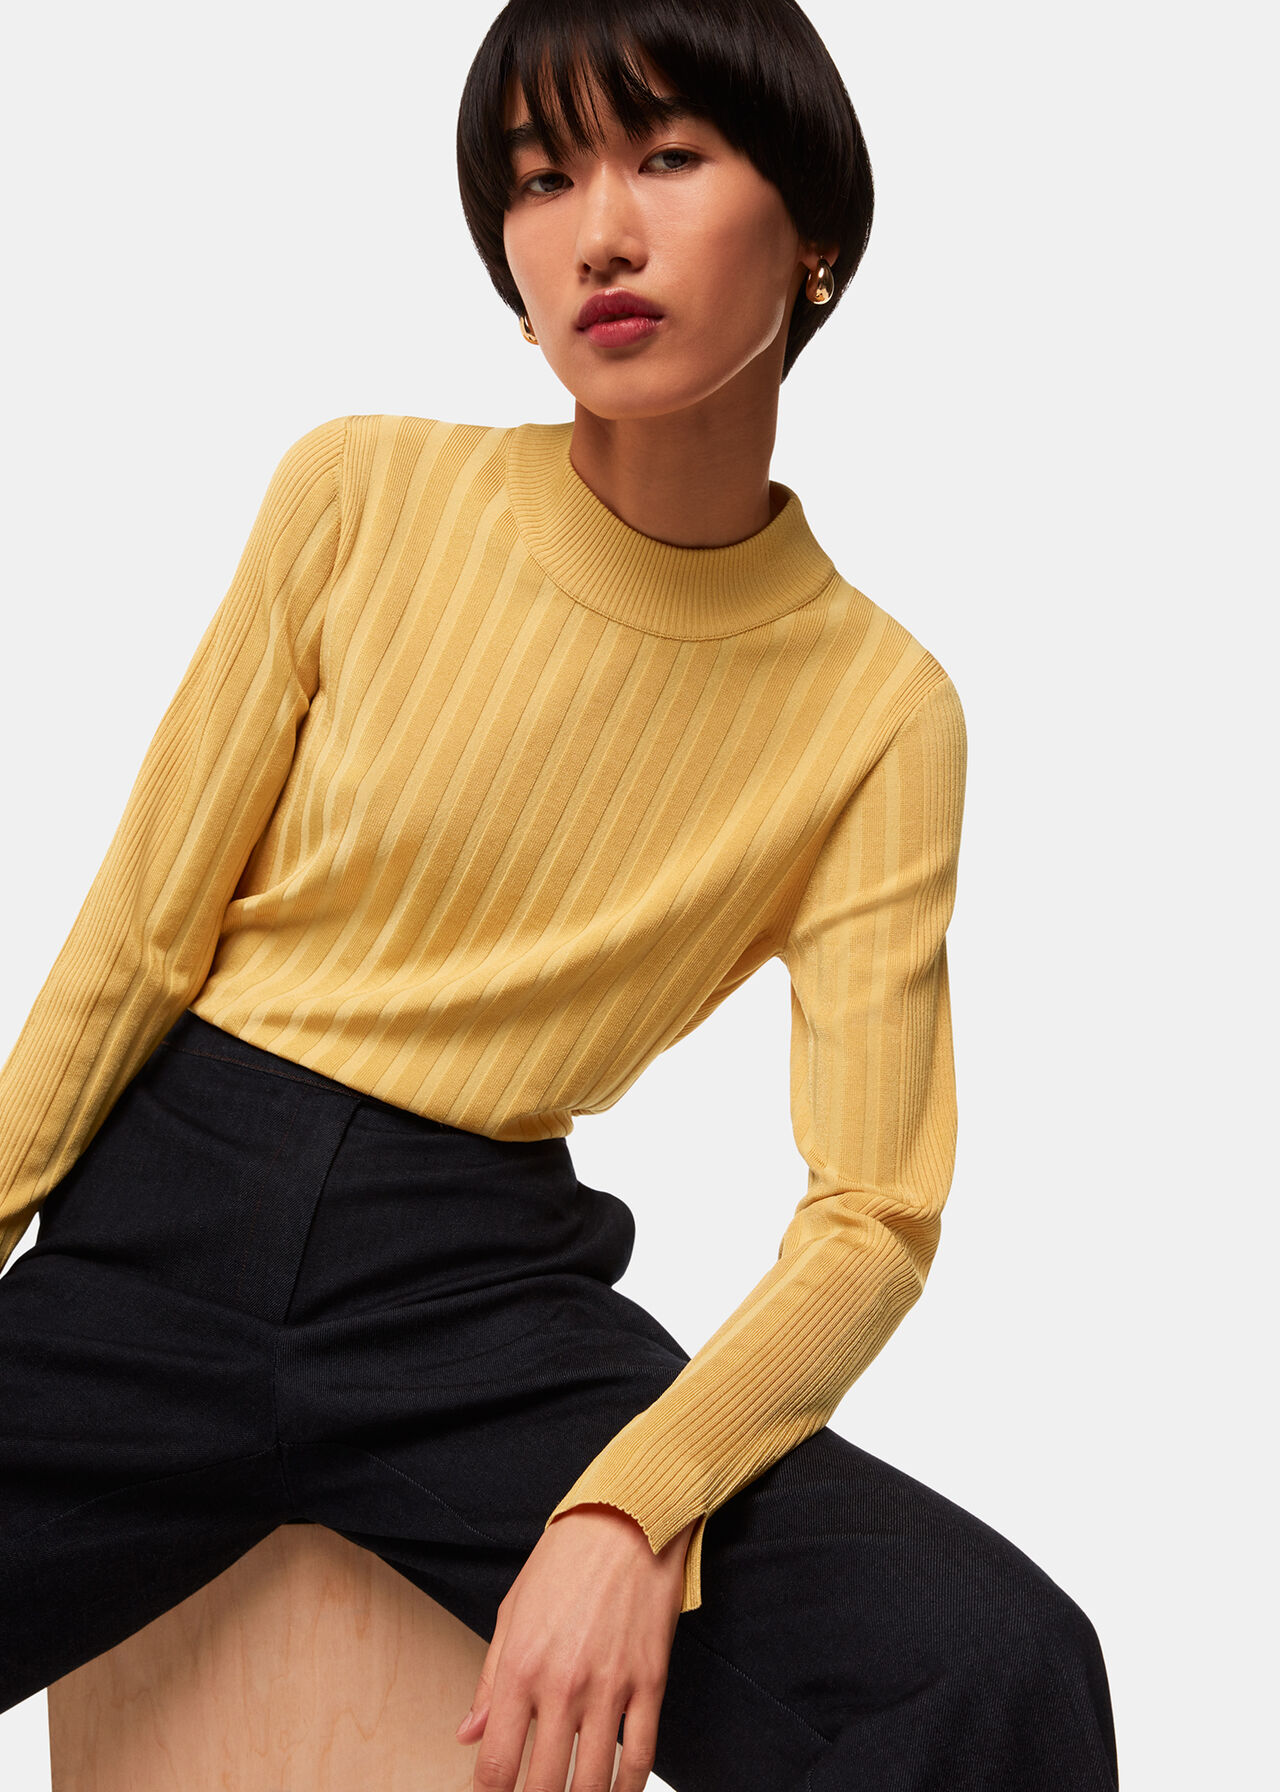 Ribbed Detail Crew Neck Knit